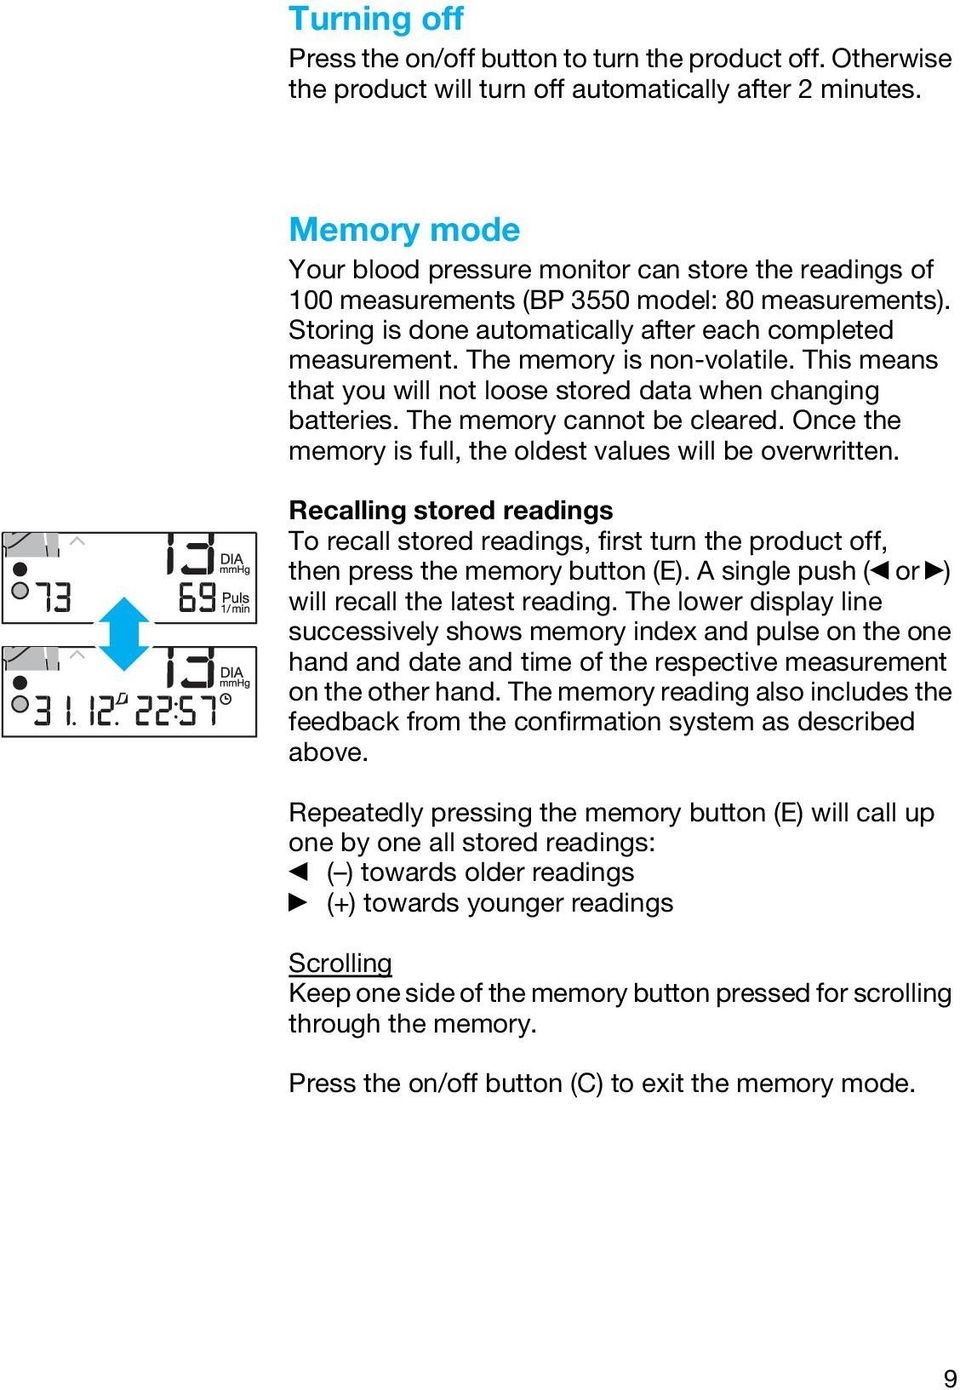 The memory is non-volatile. This means that you will not loose stored data when changing batteries. The memory cannot be cleared. Once the memory is full, the oldest values will be overwritten.